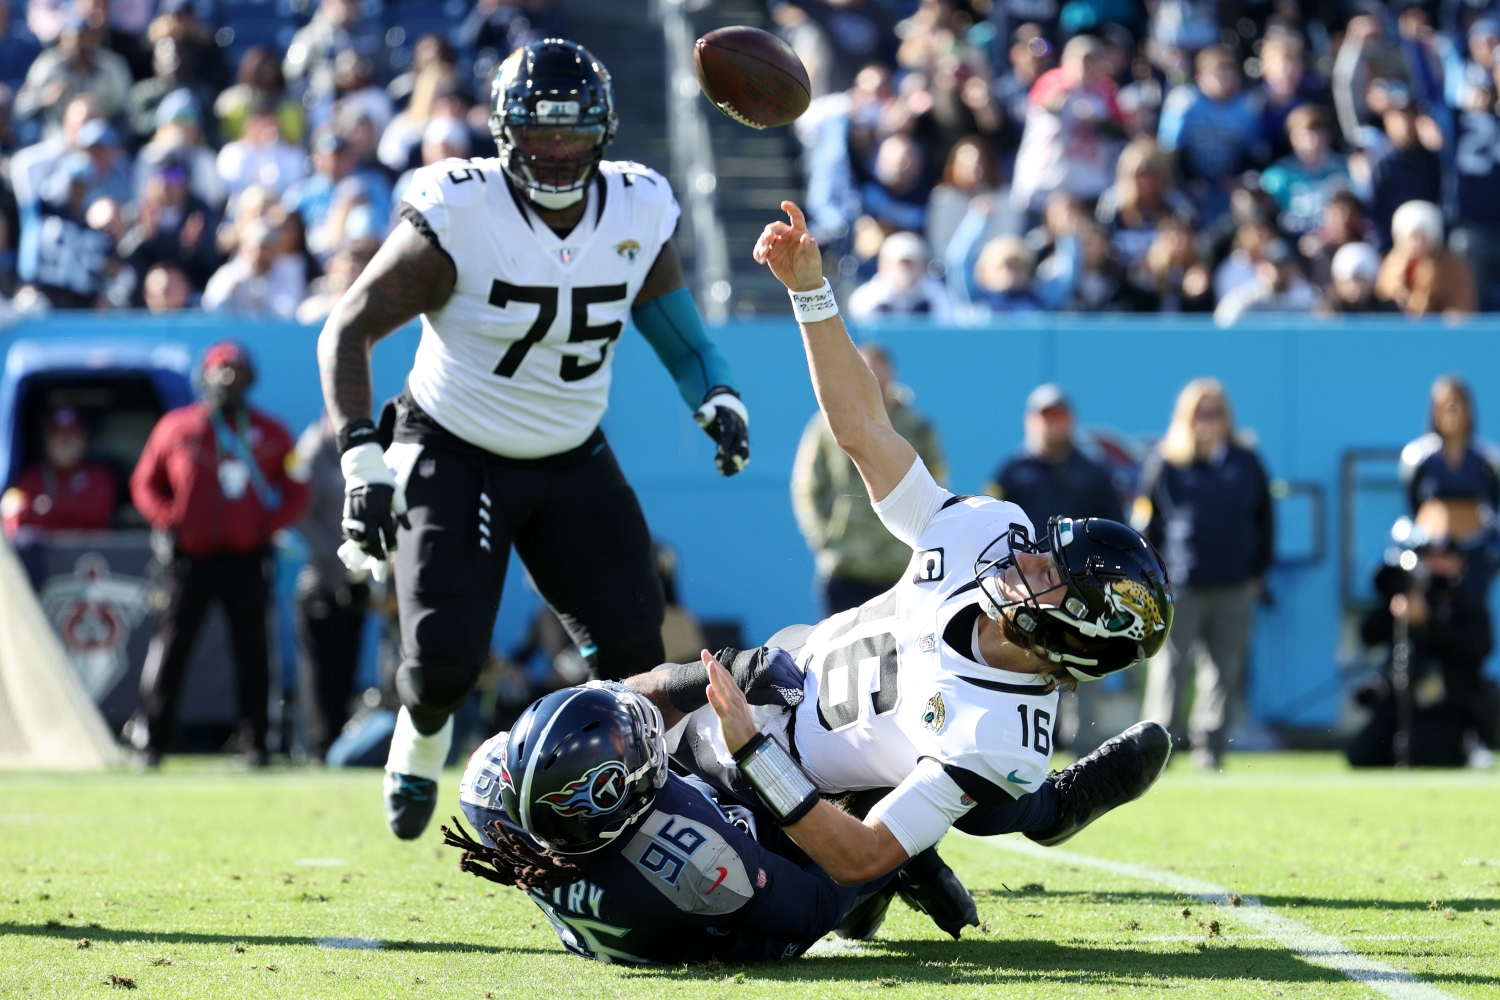 Jaguars QB Trevor Lawrence gets sacked by a Tennessee Titans defender while attempting to get rid of the ball.